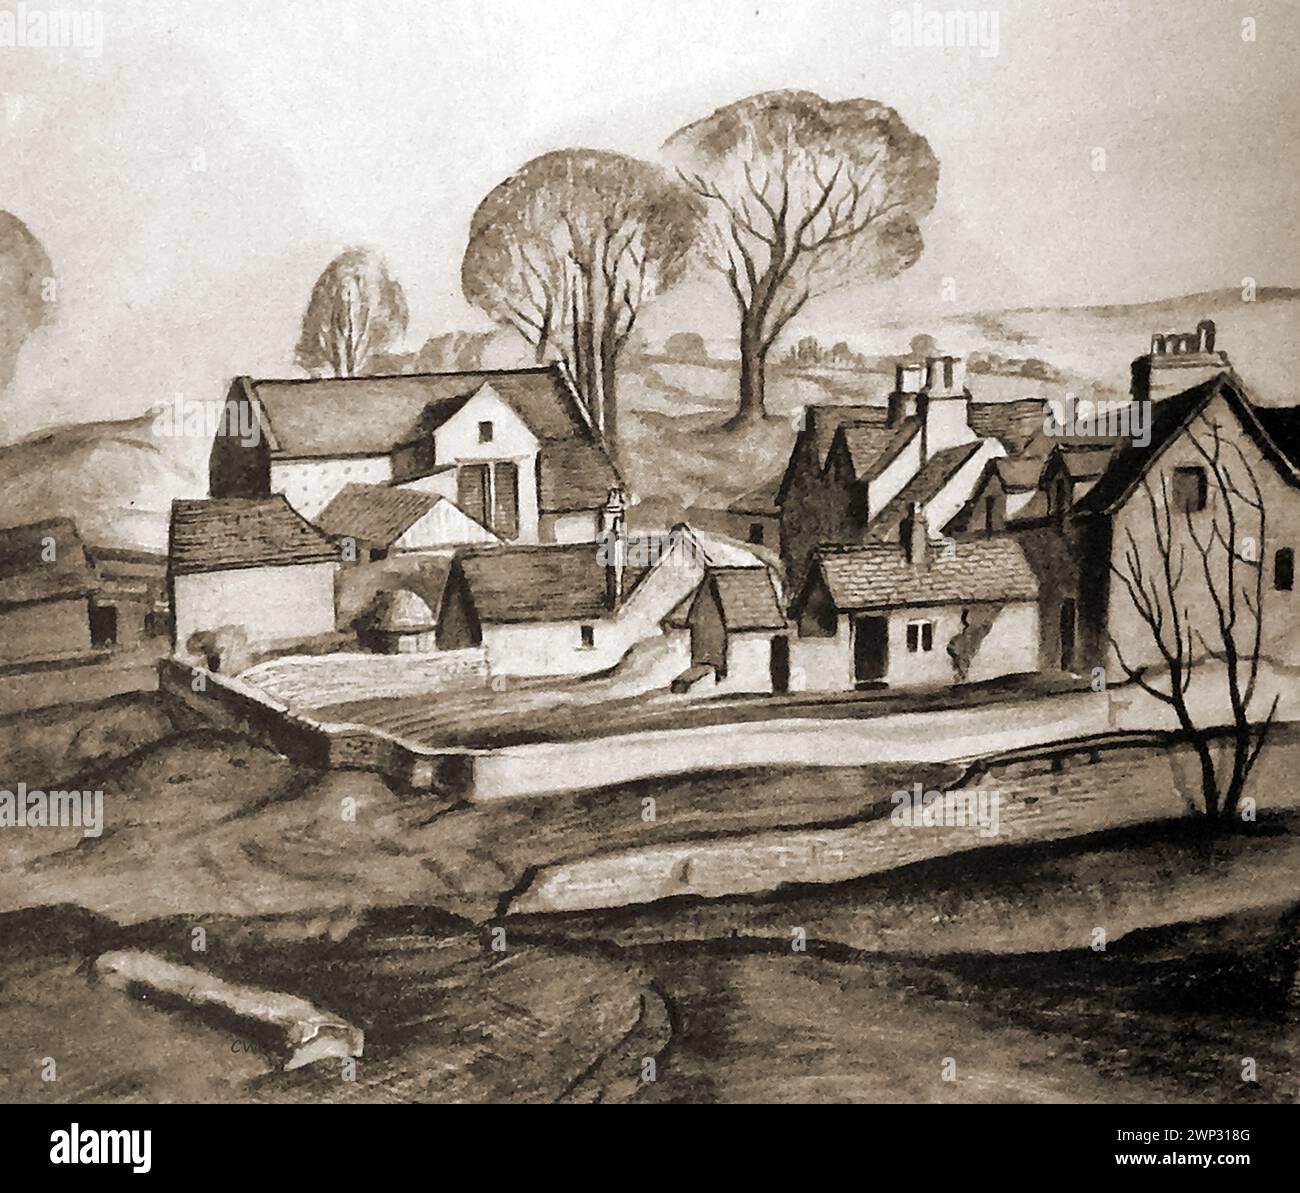 A 1935 sketch of Pullen's Farm, Cotswold, UK Stock Photo